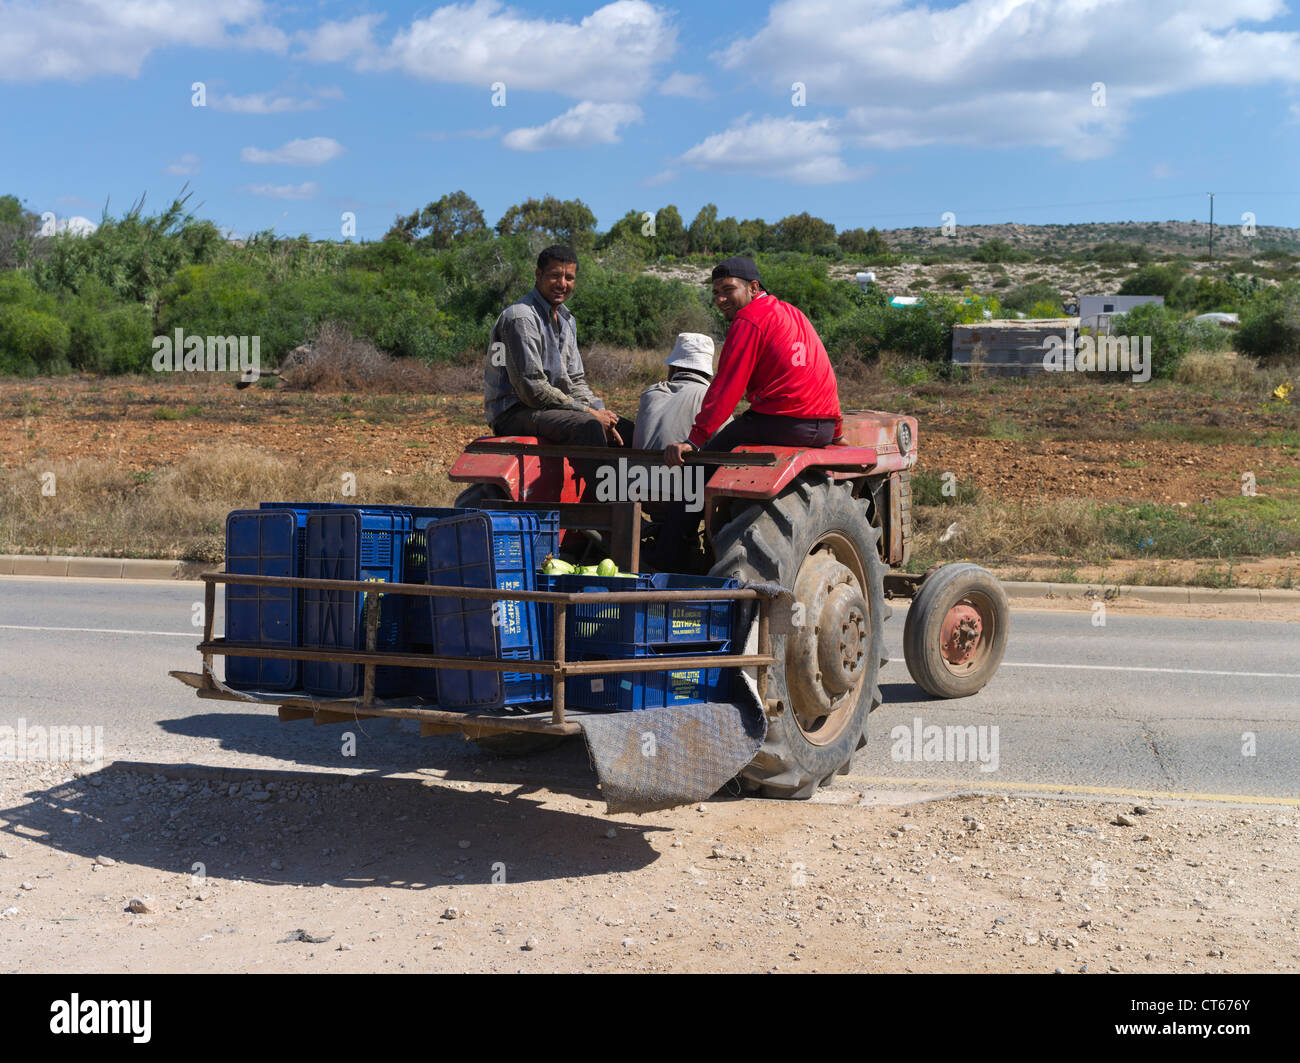 dh Cypriot farmworkers Greece FARMING SOUTH CYPRUS Fields on tractor farm workers tractors island worker people agricultural Stock Photo